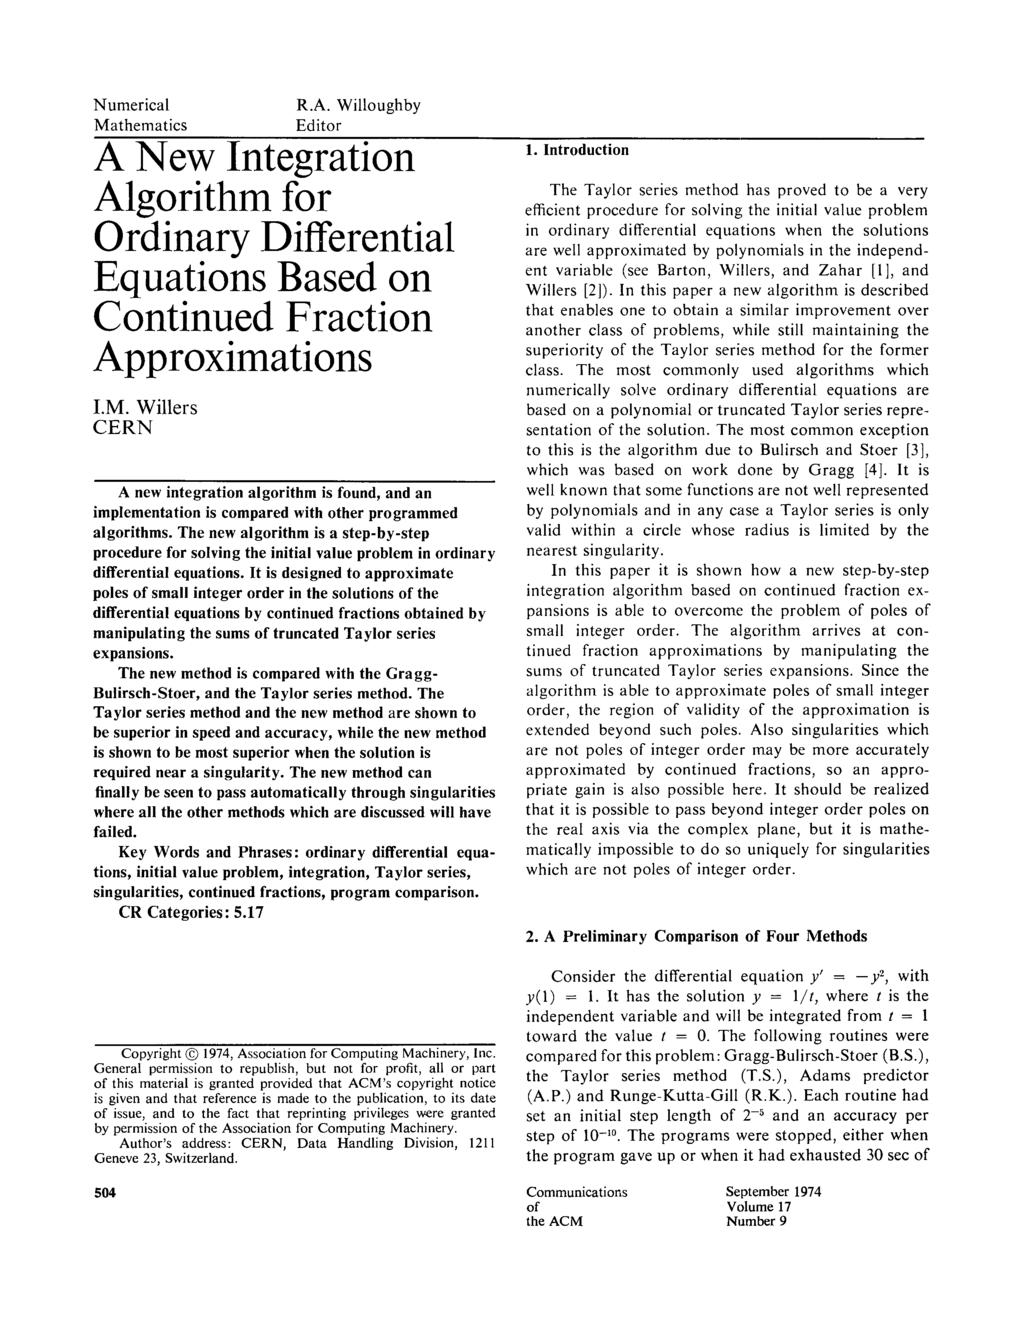 Numerical Mathematics R.A. Willoughby Editor A New Integration Algorithm for Ordinary Differential Equations Based on Continued Fraction Approximations I.M. Willers CERN A new integration algorithm is found, and an implementation is compared with other programmed algorithms.